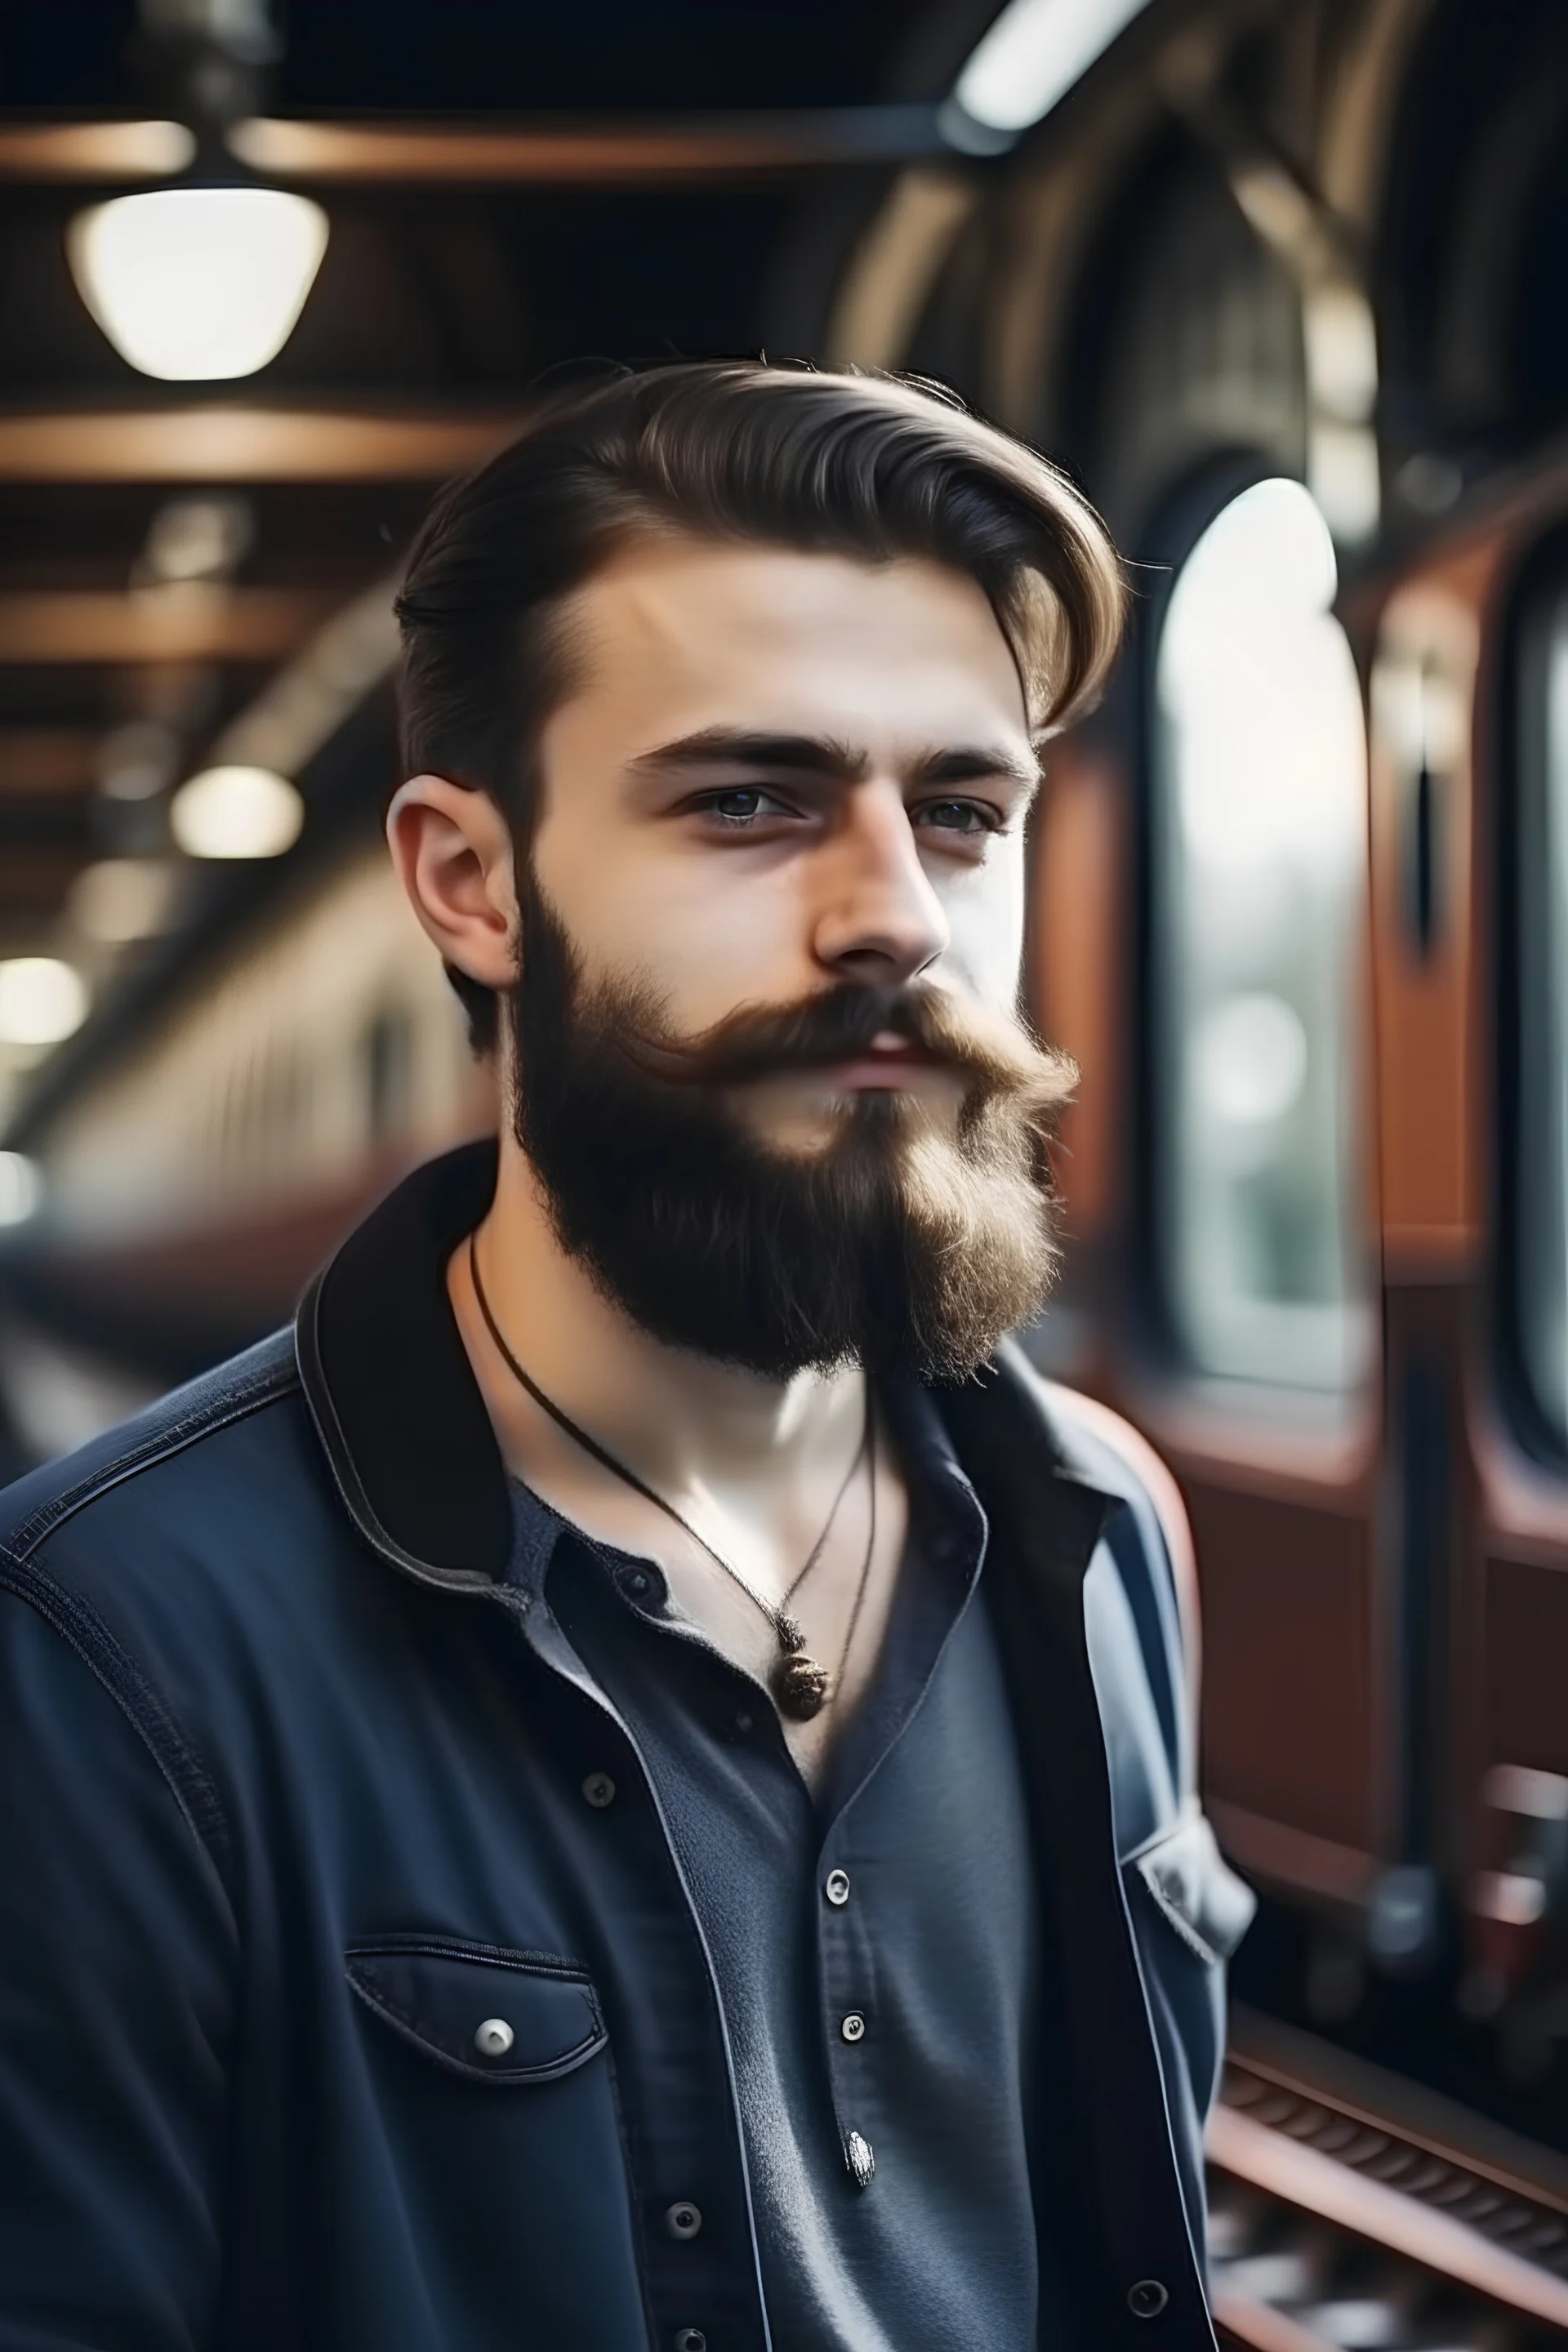 Handsome young Men with beard portrait before a train Engine